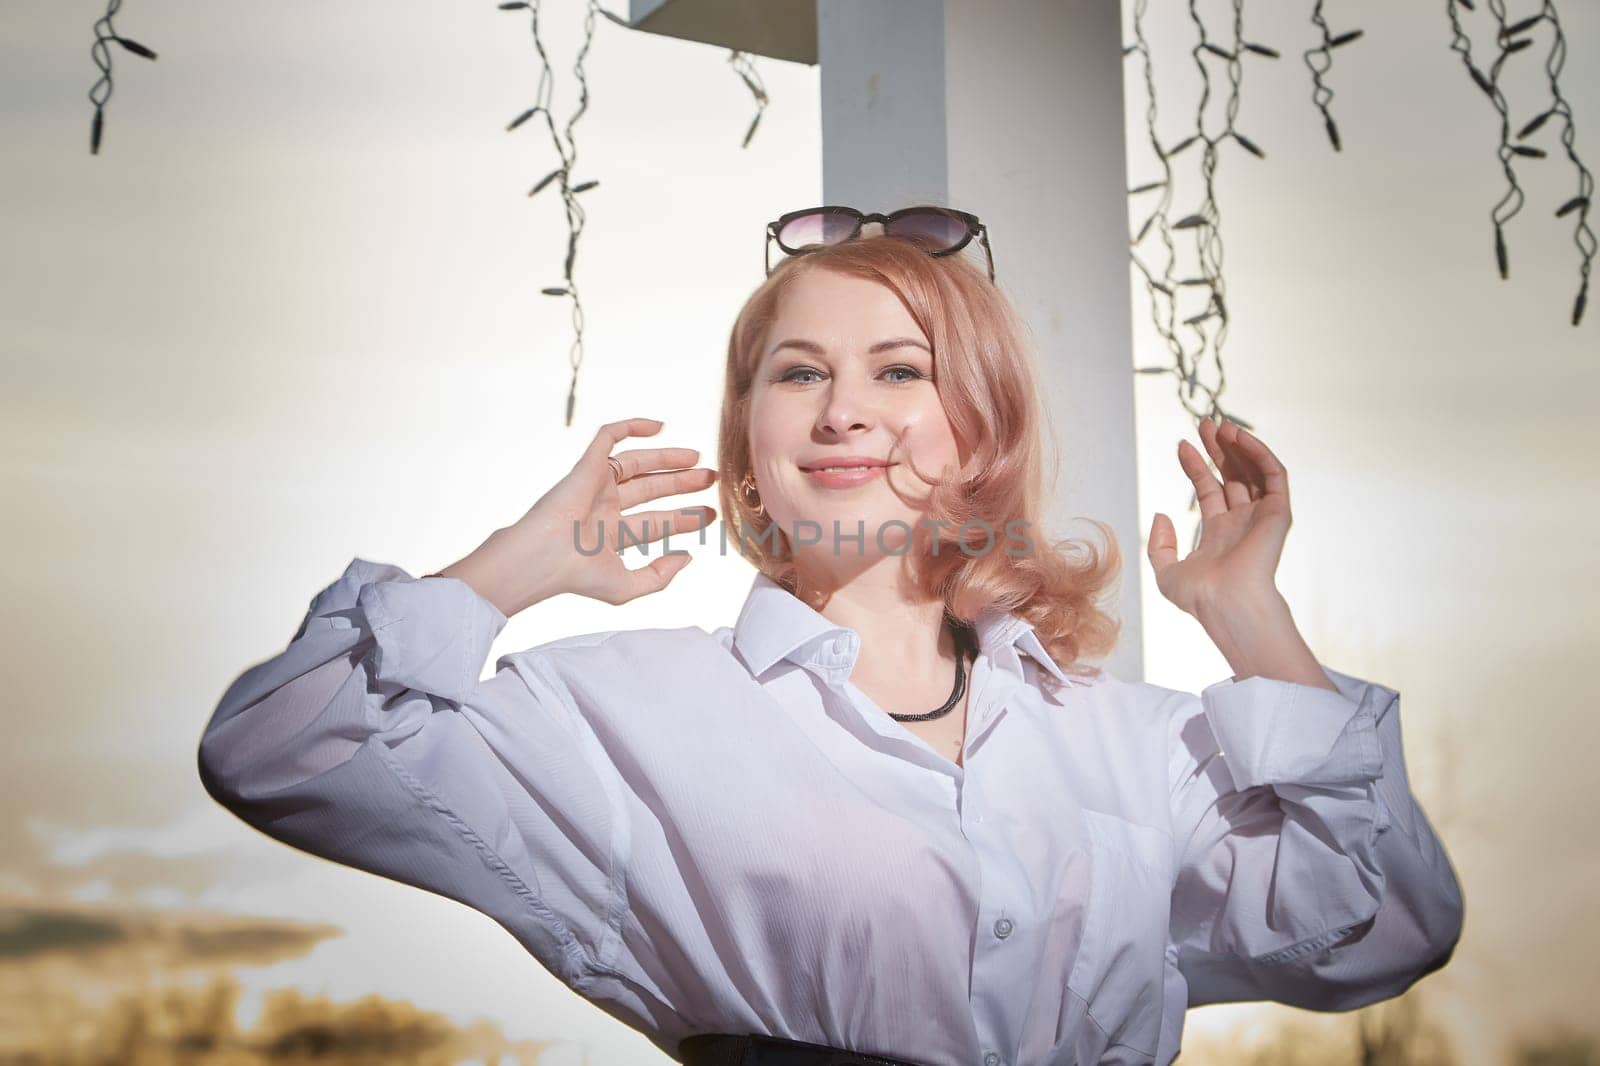 Portrait of Beautiful girl with red hair in white shirt in open wooden pavillion in village or small town. Young slender woman and sky with clouds on background on autumn, spring or summer evening